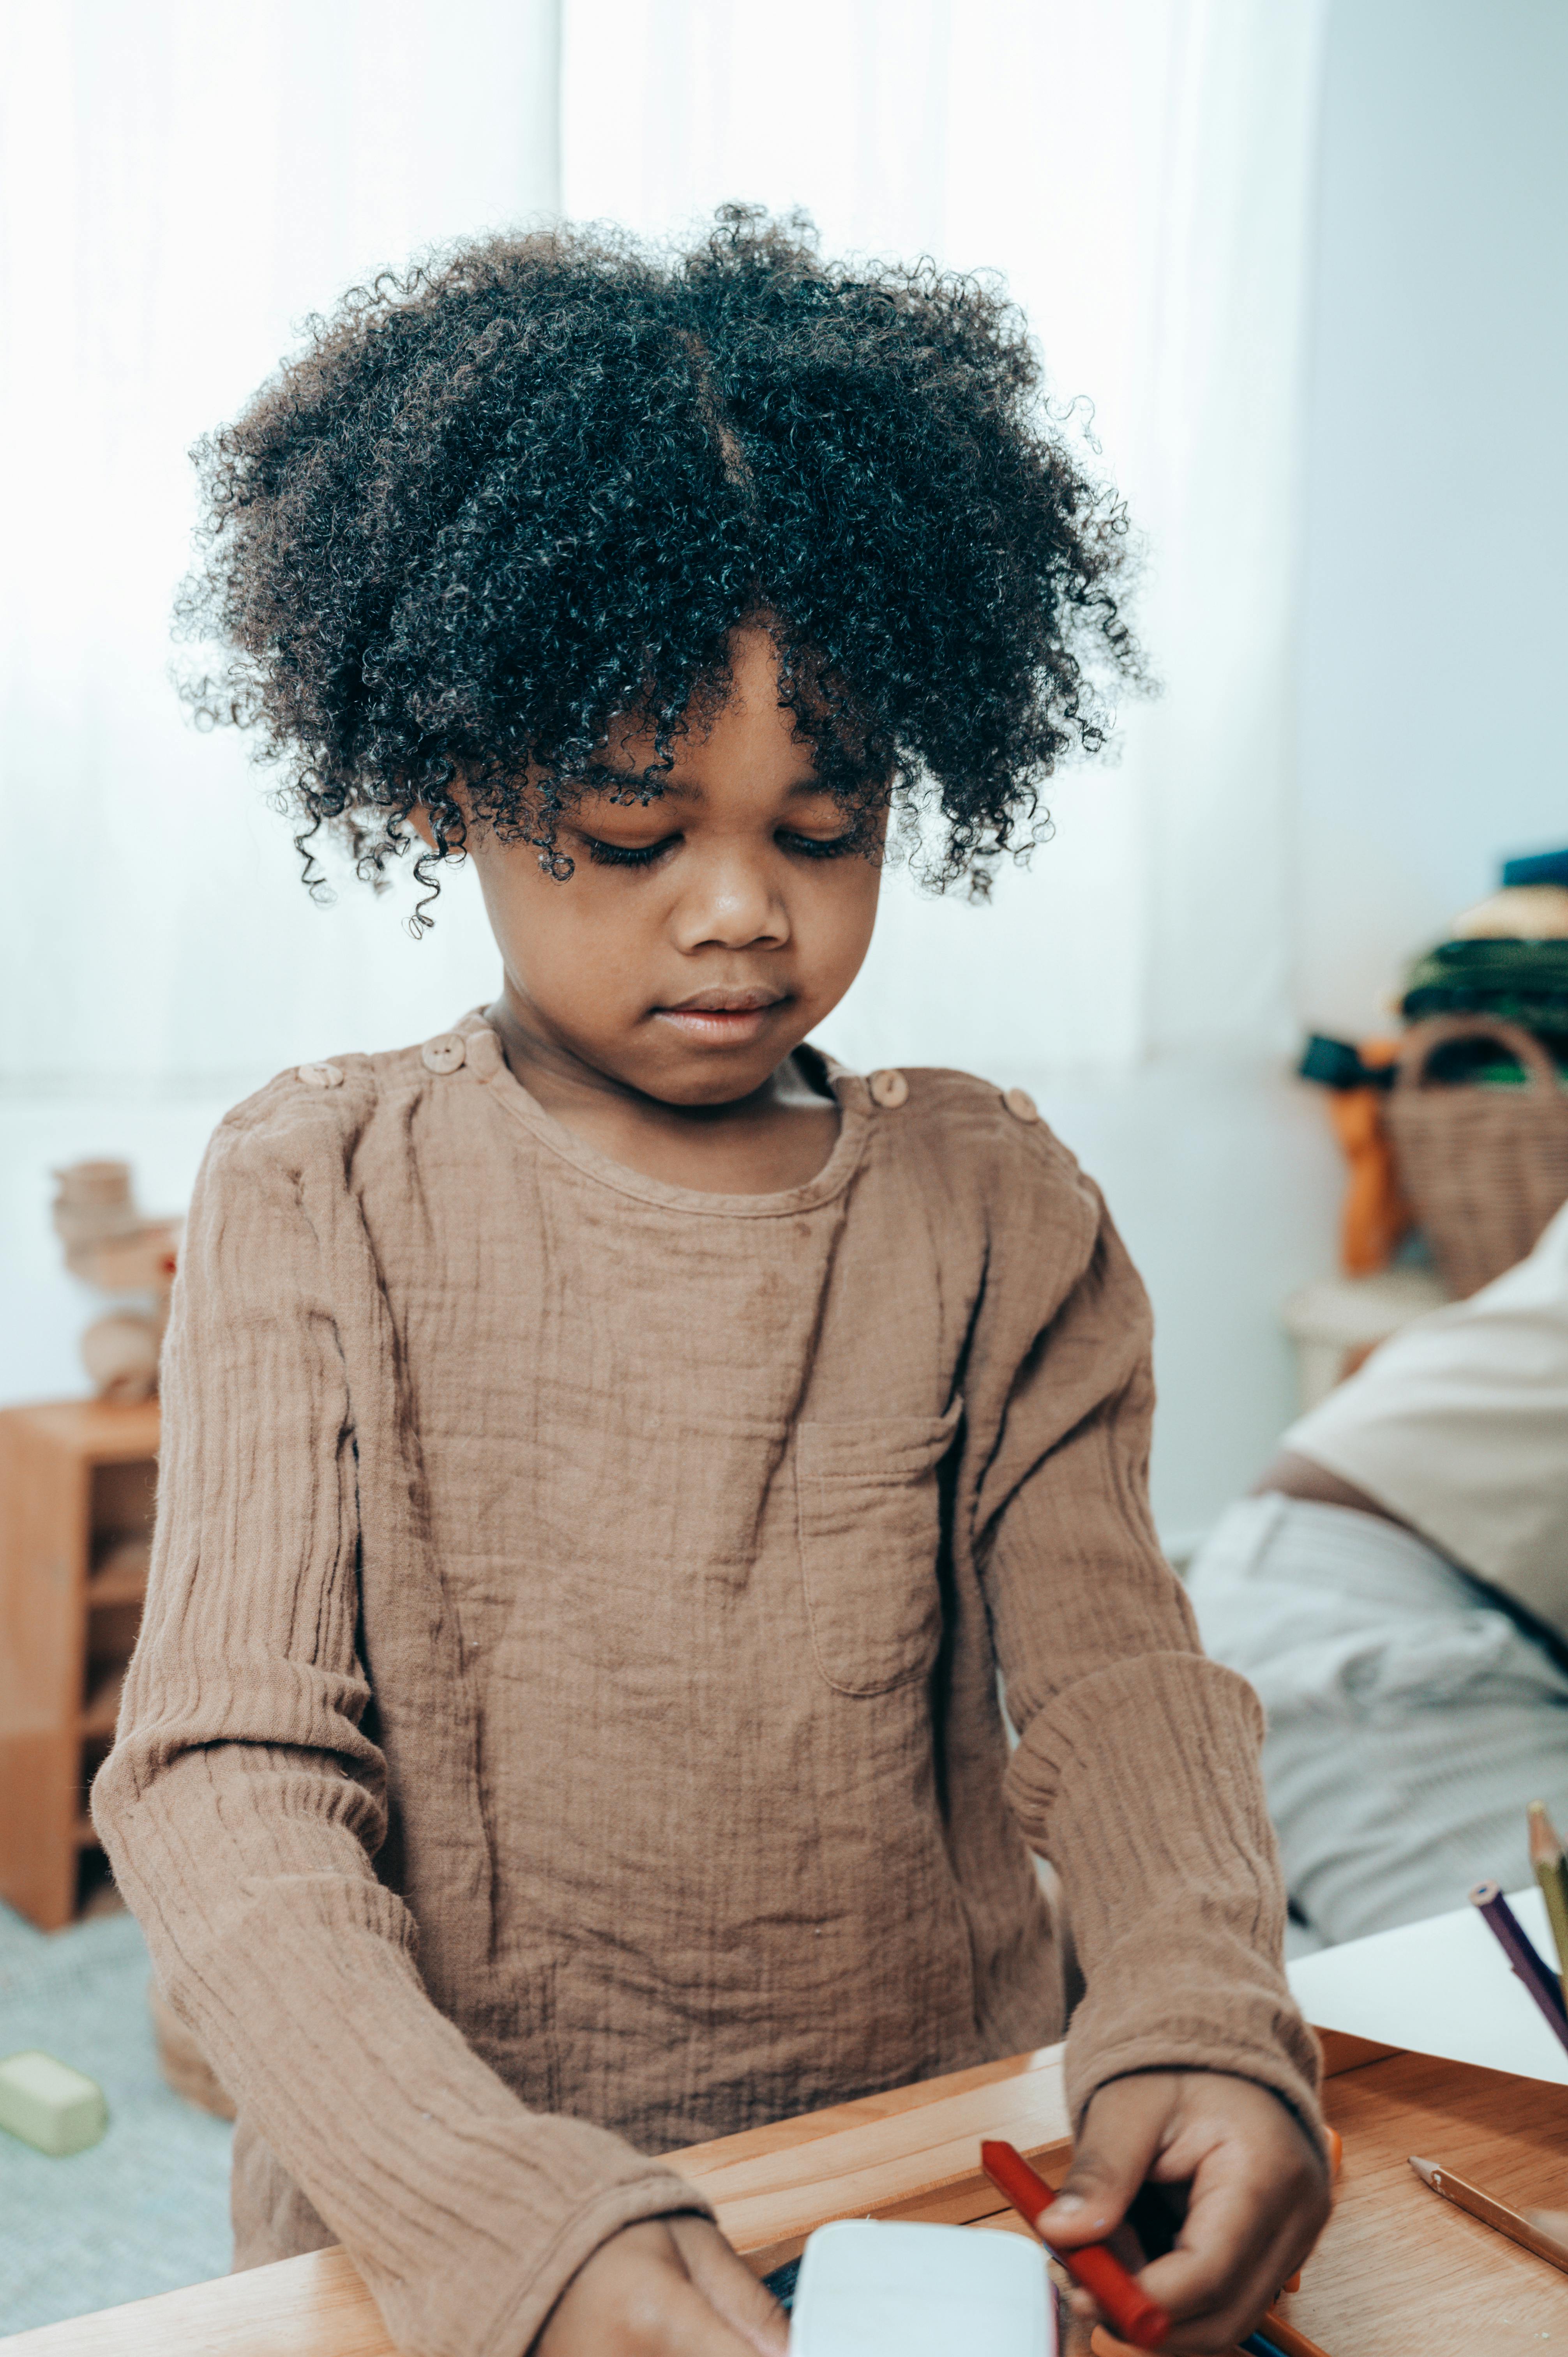 A little girl looking down at a paper and crayon | Source: Pexels